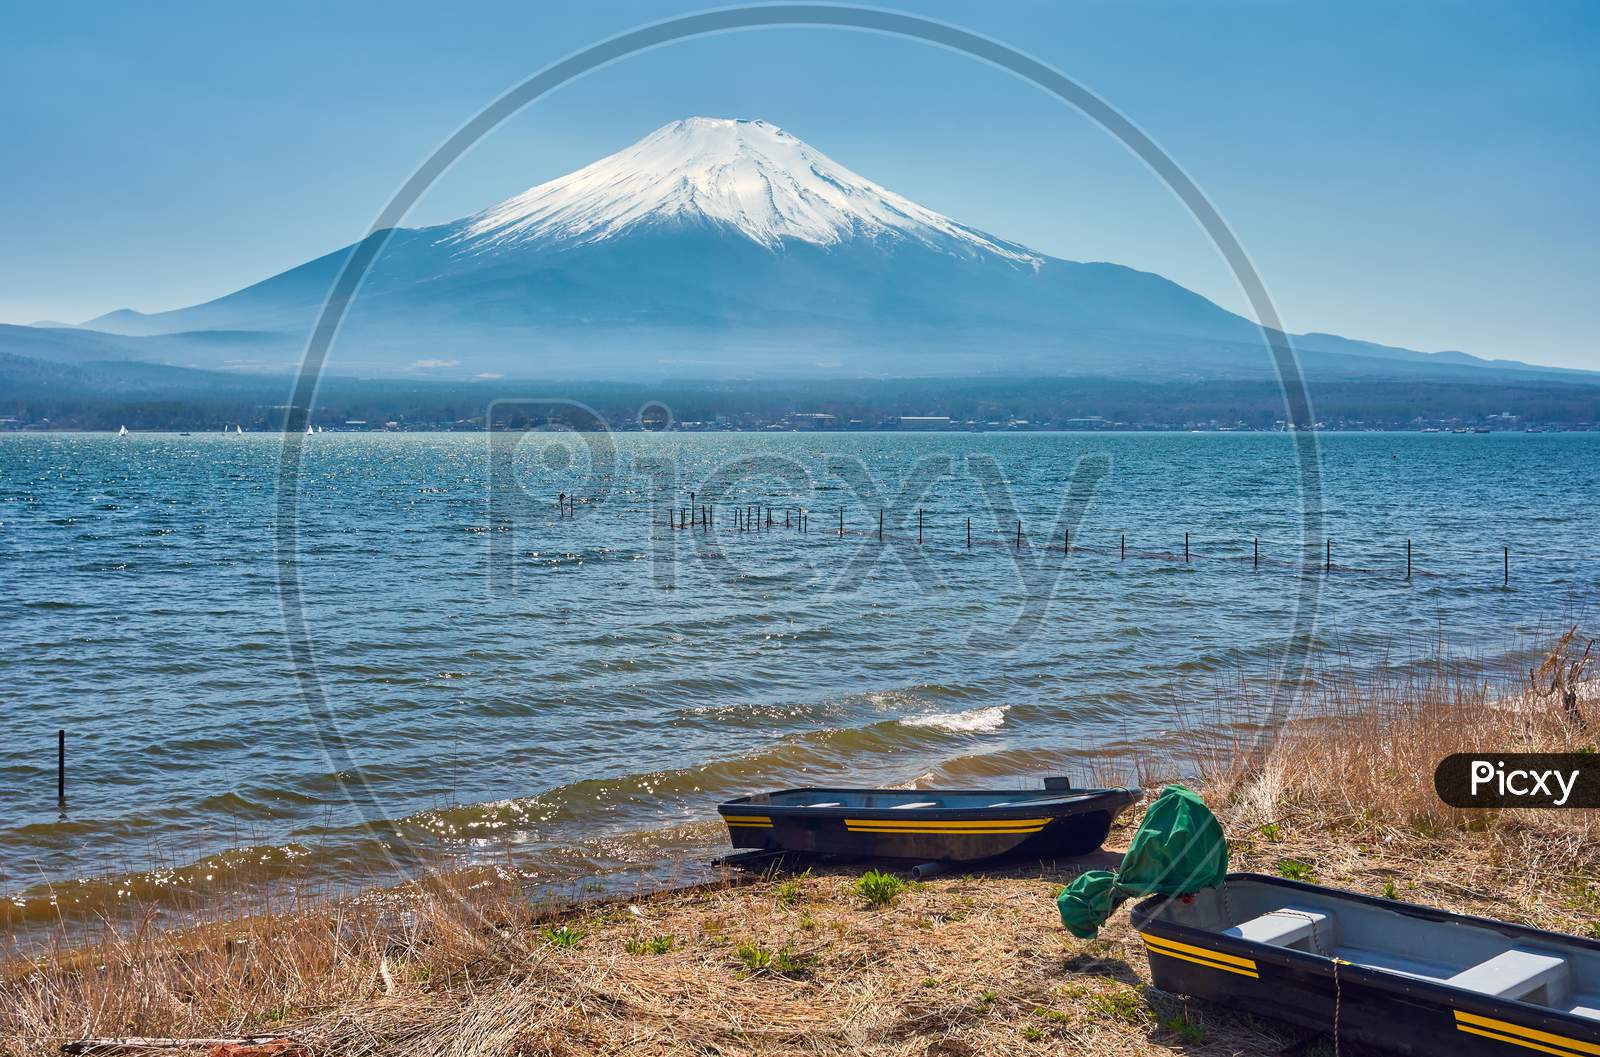 Iconic View Of Lake Yamanaka And Mt. Fuji In The Background, Japan